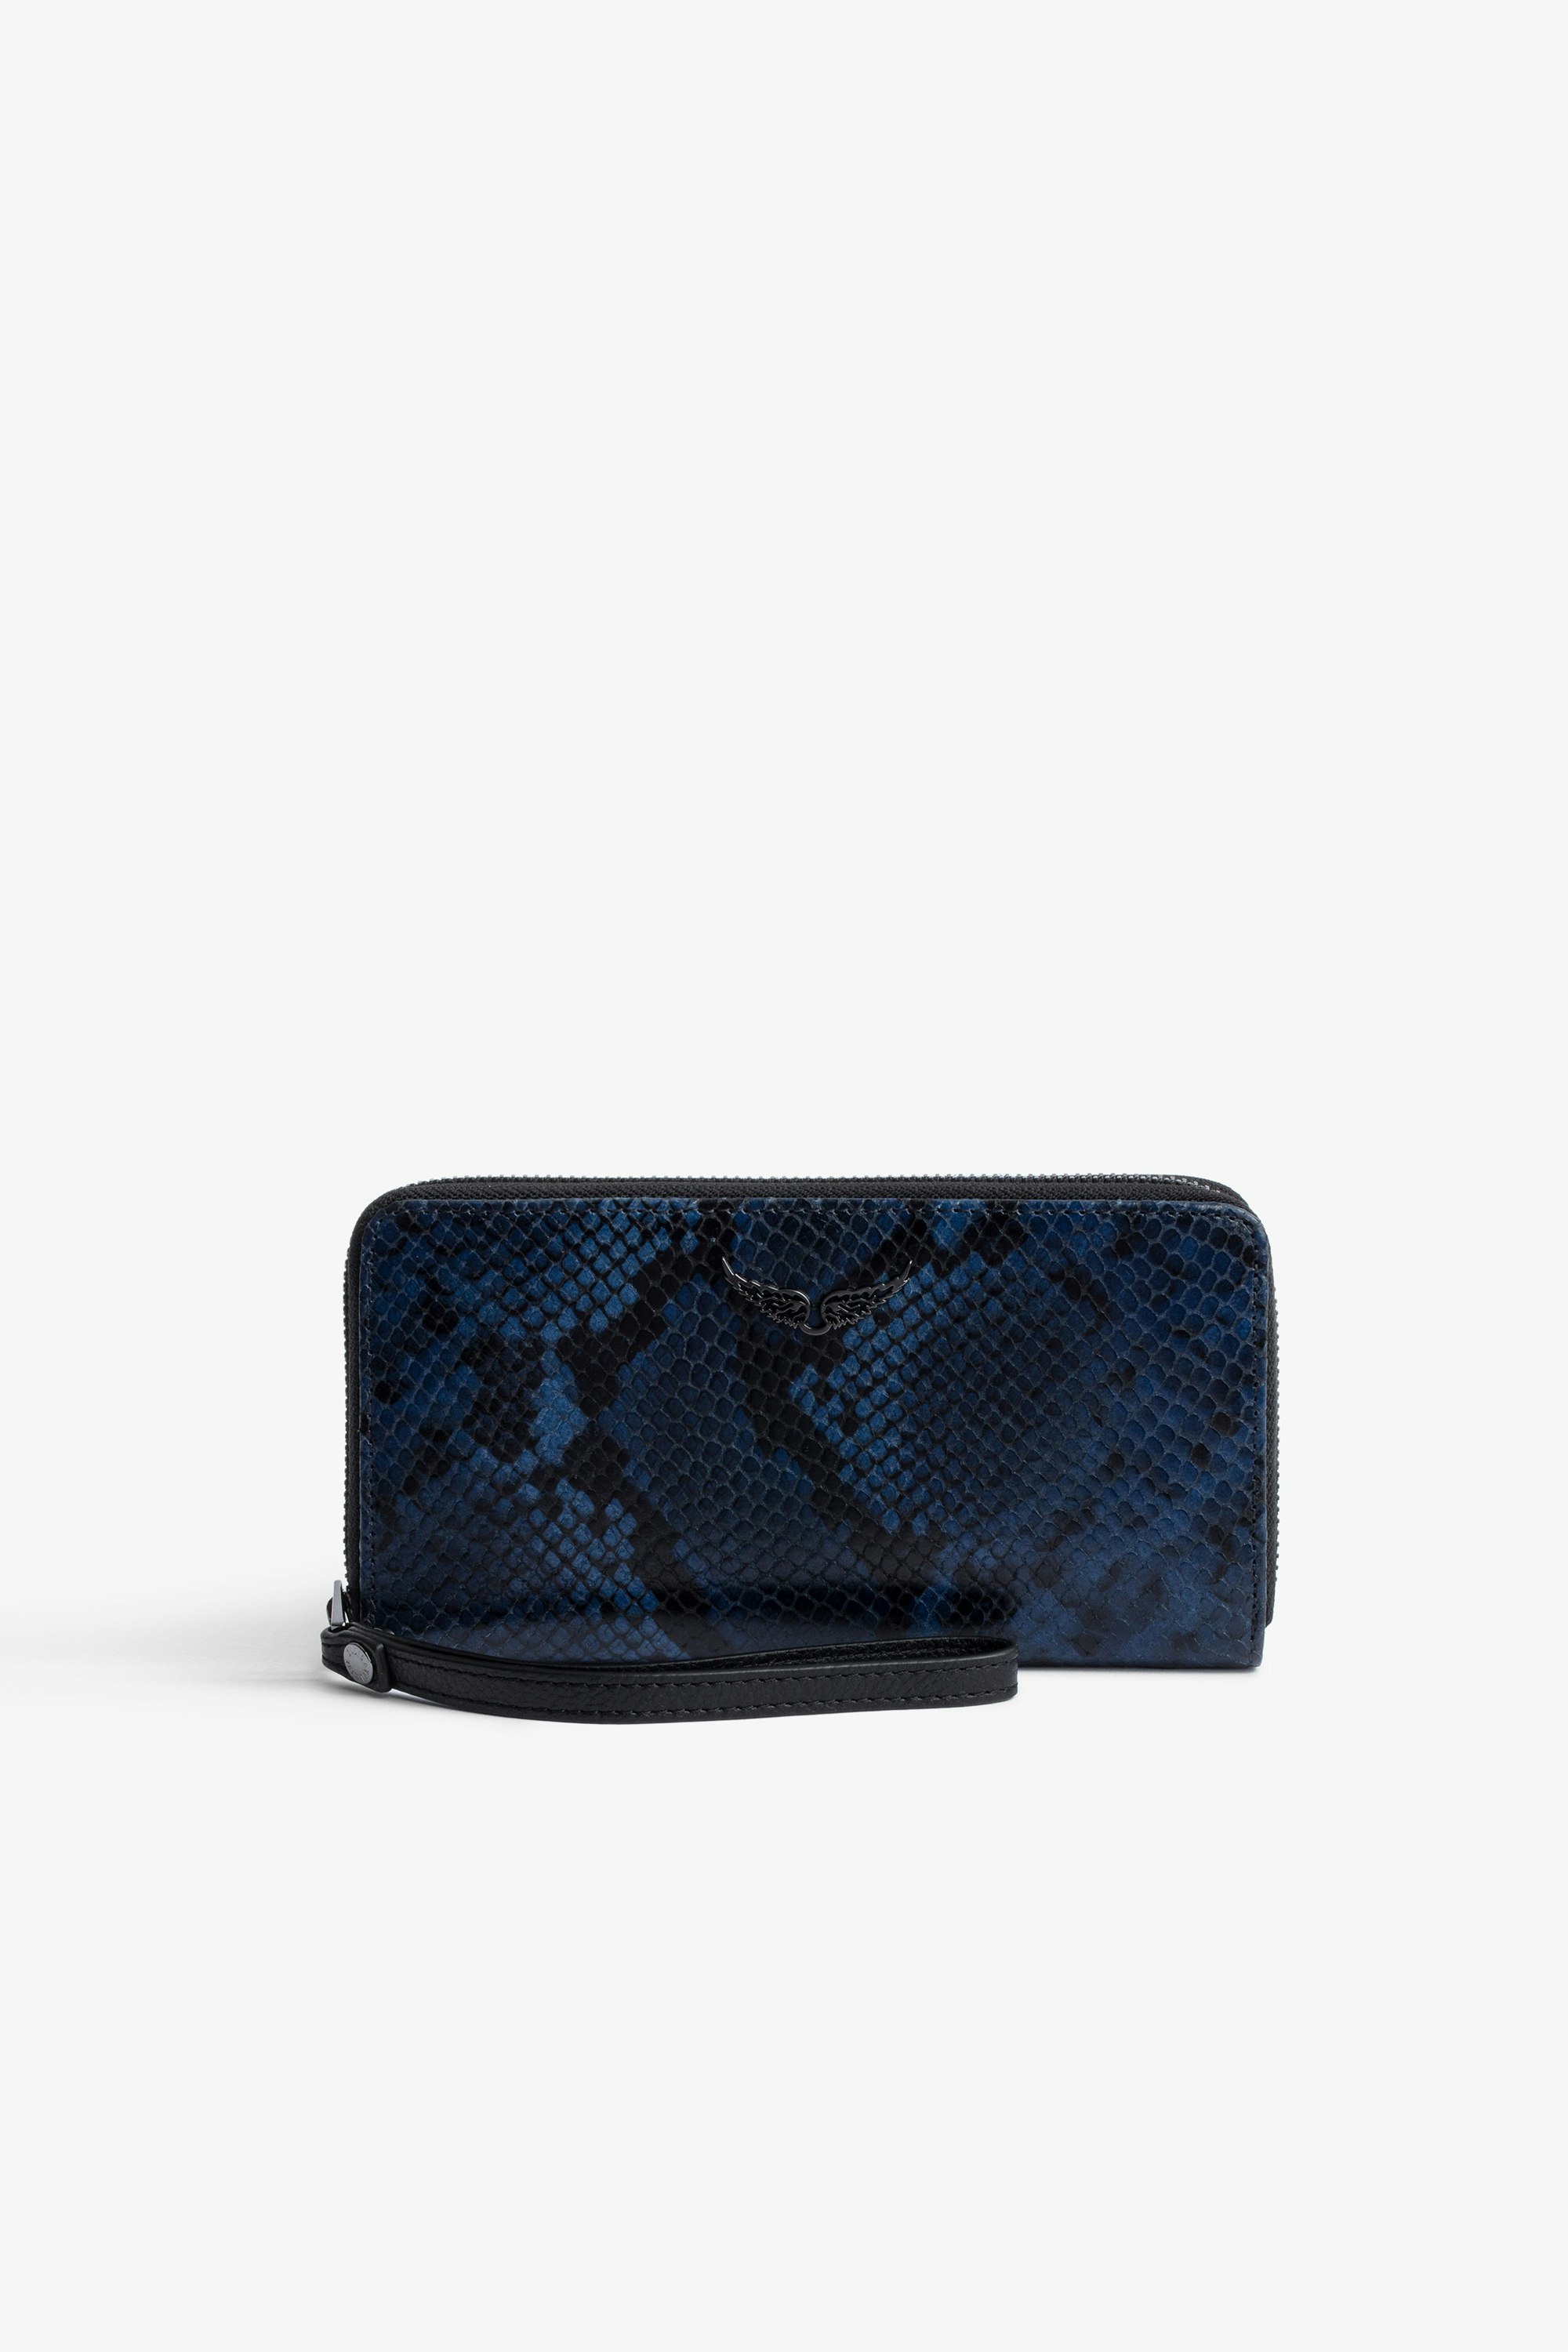 Compagnon Wallet Women’s Compagnon wallet in black and blue python-effect leather